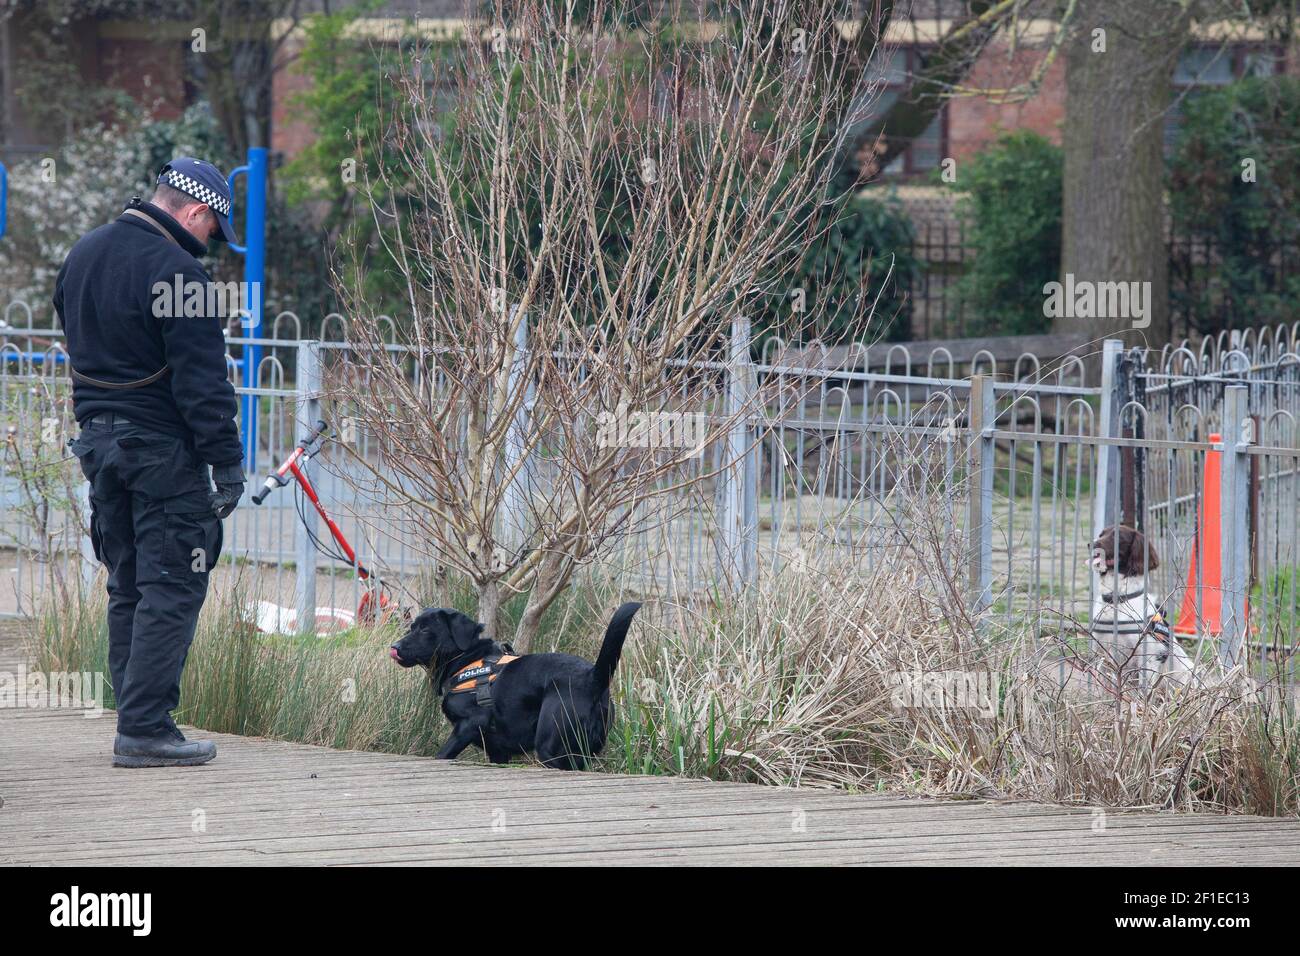 London, UK, 8 March 2021: Police sniffer dogs search for evidence relating to the disappearance of Sarah Everard, last seen on Poynders Road, Clapham, part of the A205  South Circular. Agnes Riley Gardens is on Poynders Road and was also searched by police sniffer dogs. Anna Watson/Alamy Live News Stock Photo